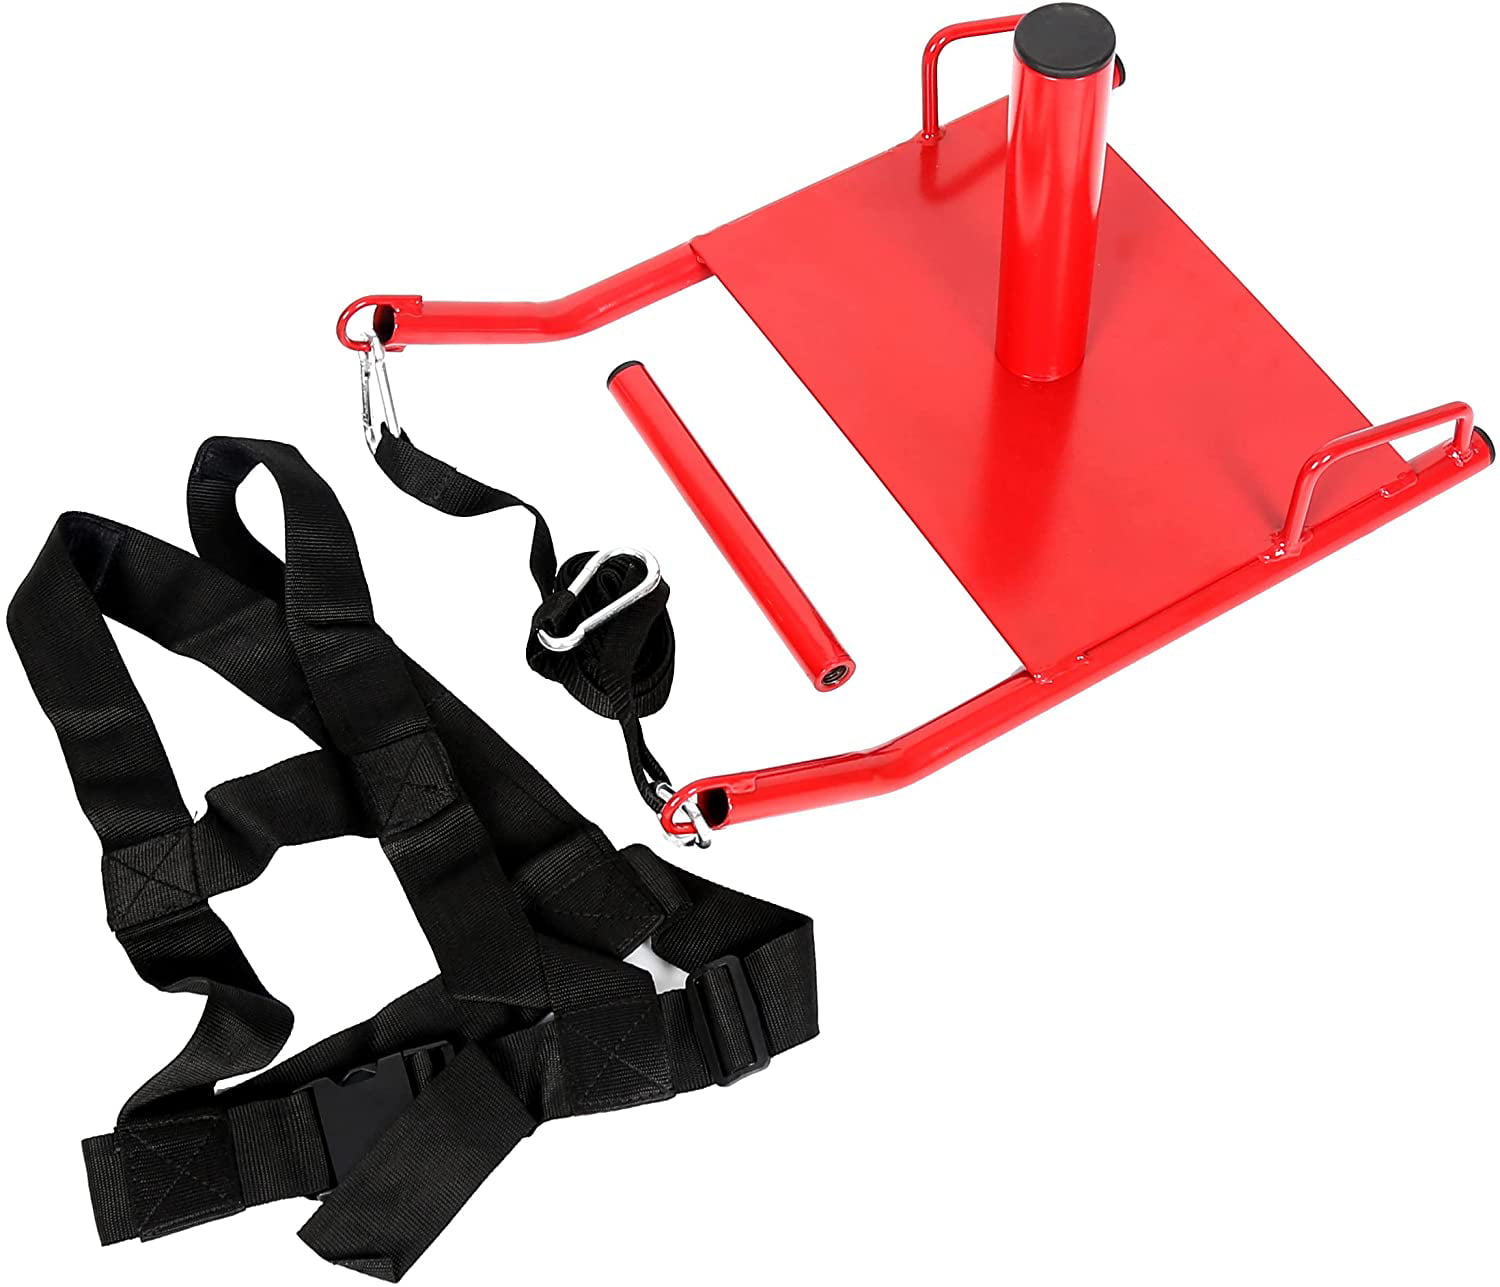 Power Speed Sled Handled With Harness Resistance Training Crossfit Running 